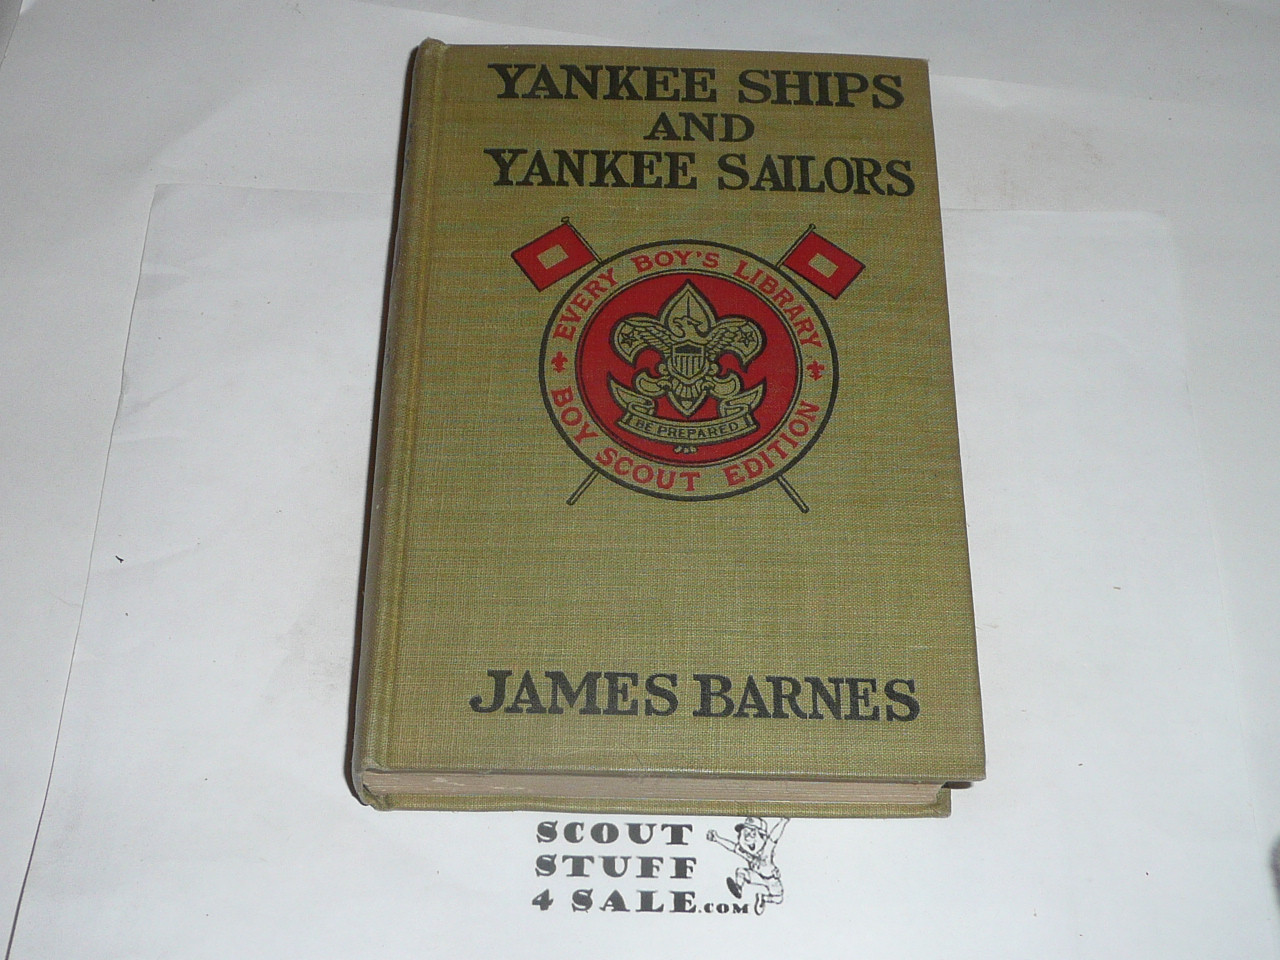 Yankee Ships and Yankee Sailors, James Barnes, Every Boy's Library Edition, Type Two Binding